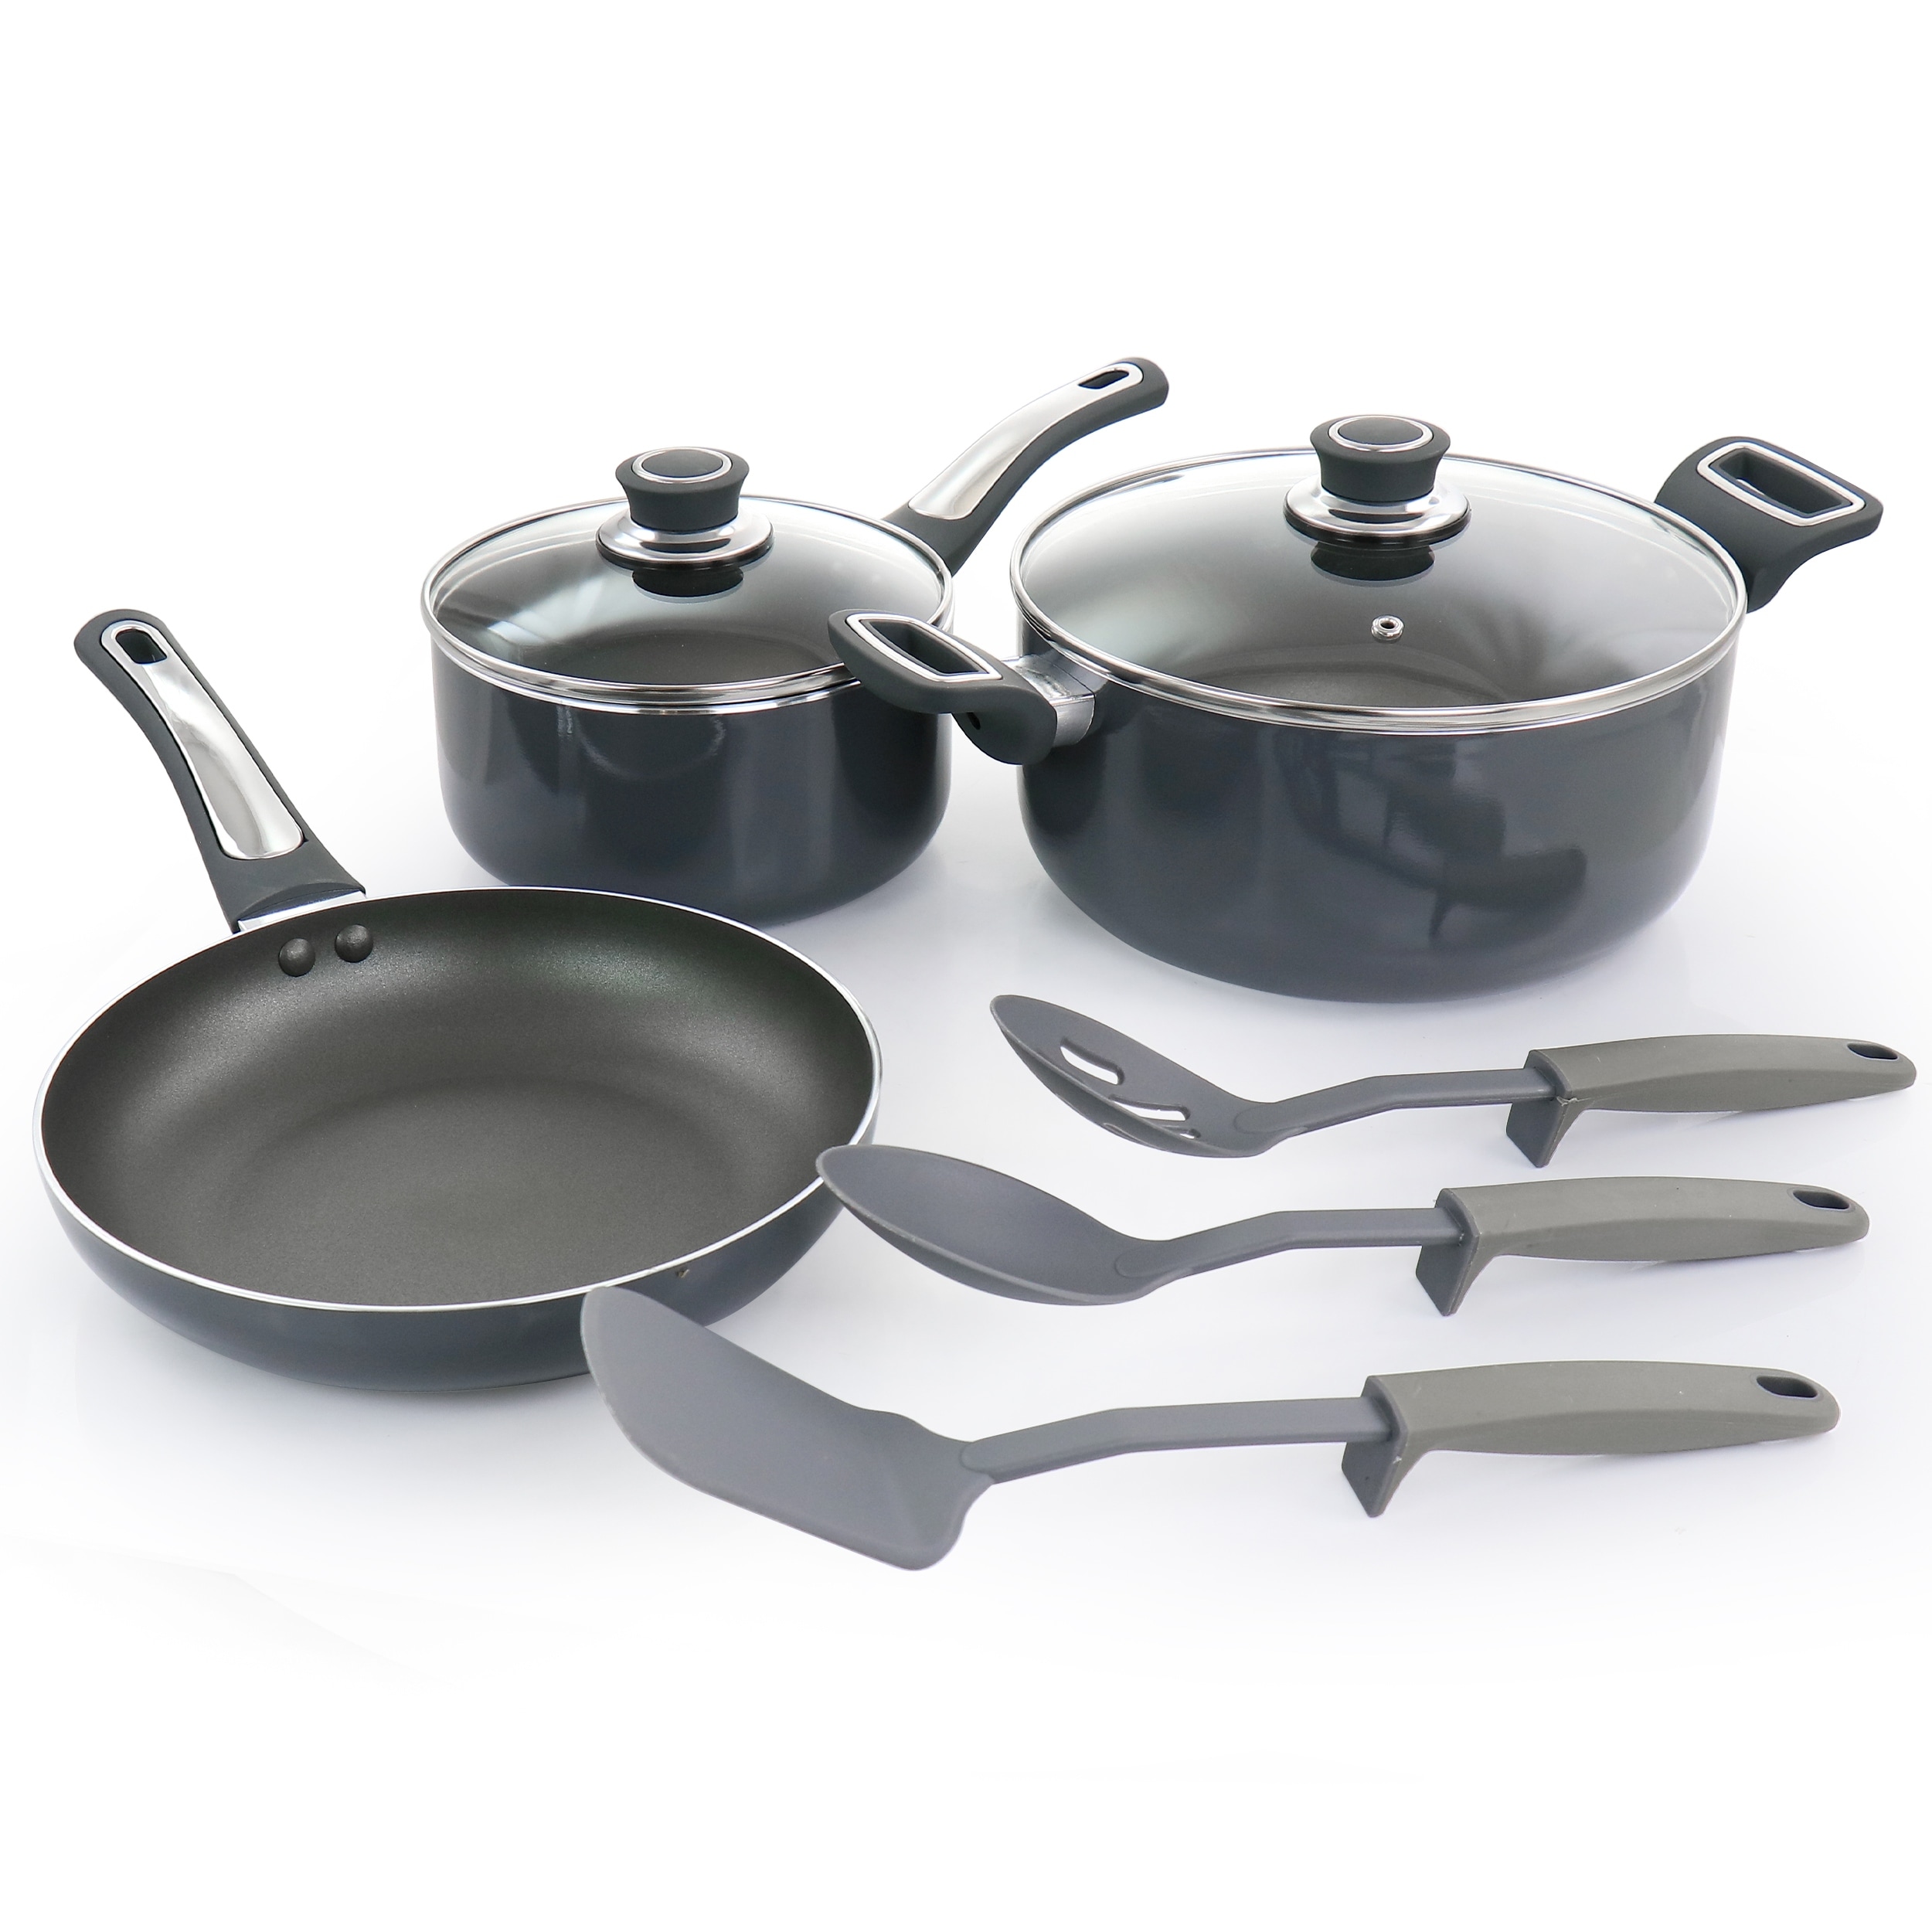 Country Kitchen Nonstick Induction Cookware Sets, 8 Piece Aluminum Pots and  Pans 